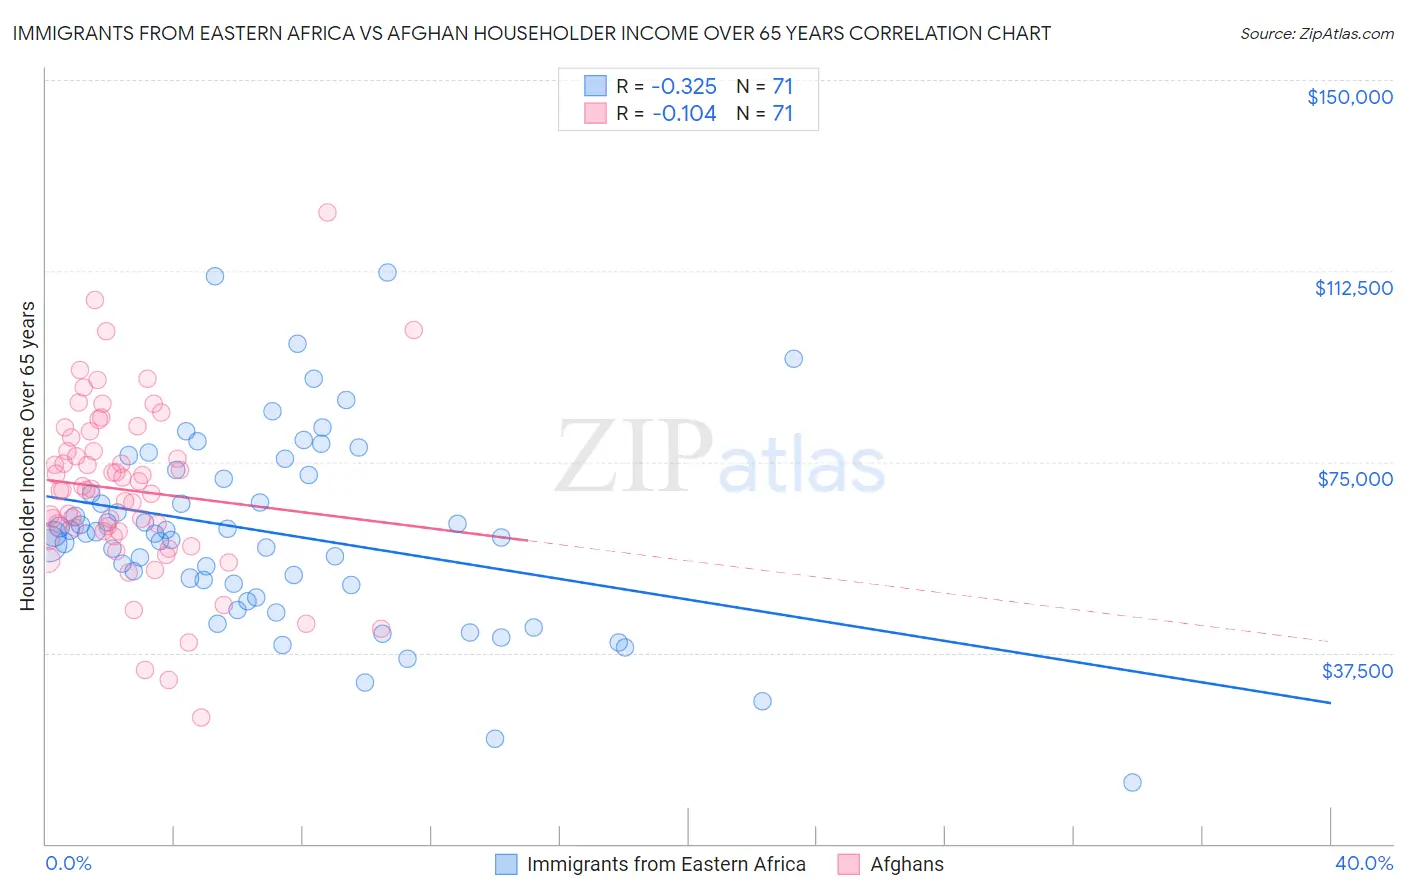 Immigrants from Eastern Africa vs Afghan Householder Income Over 65 years